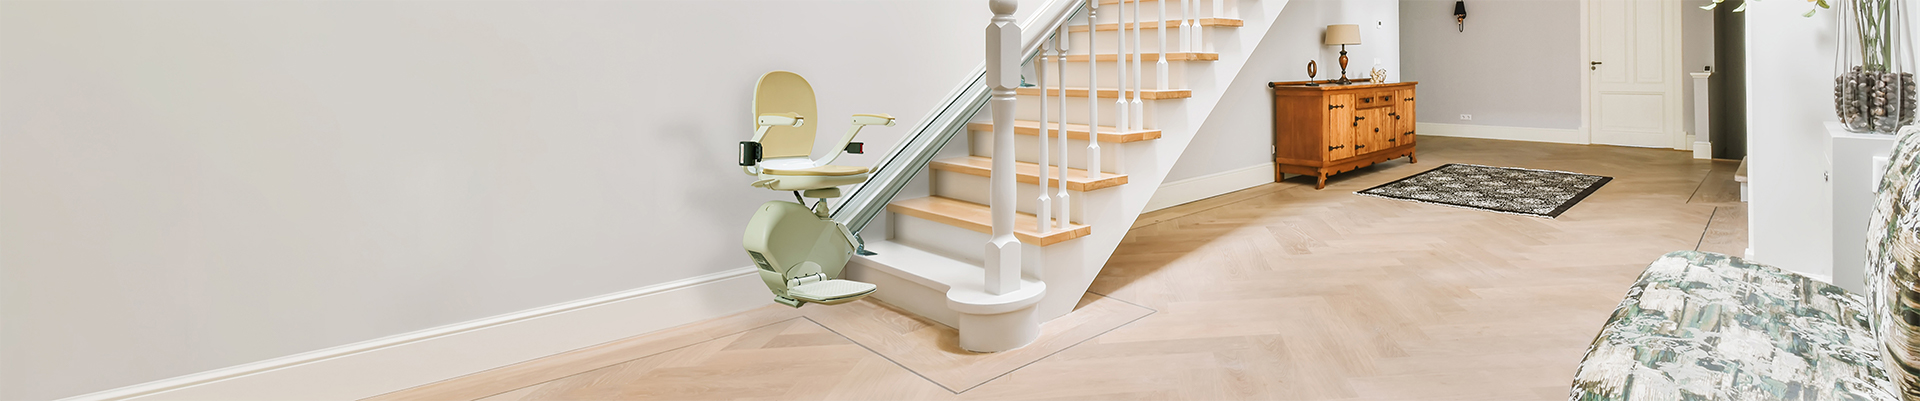 Stairlifts in a York home